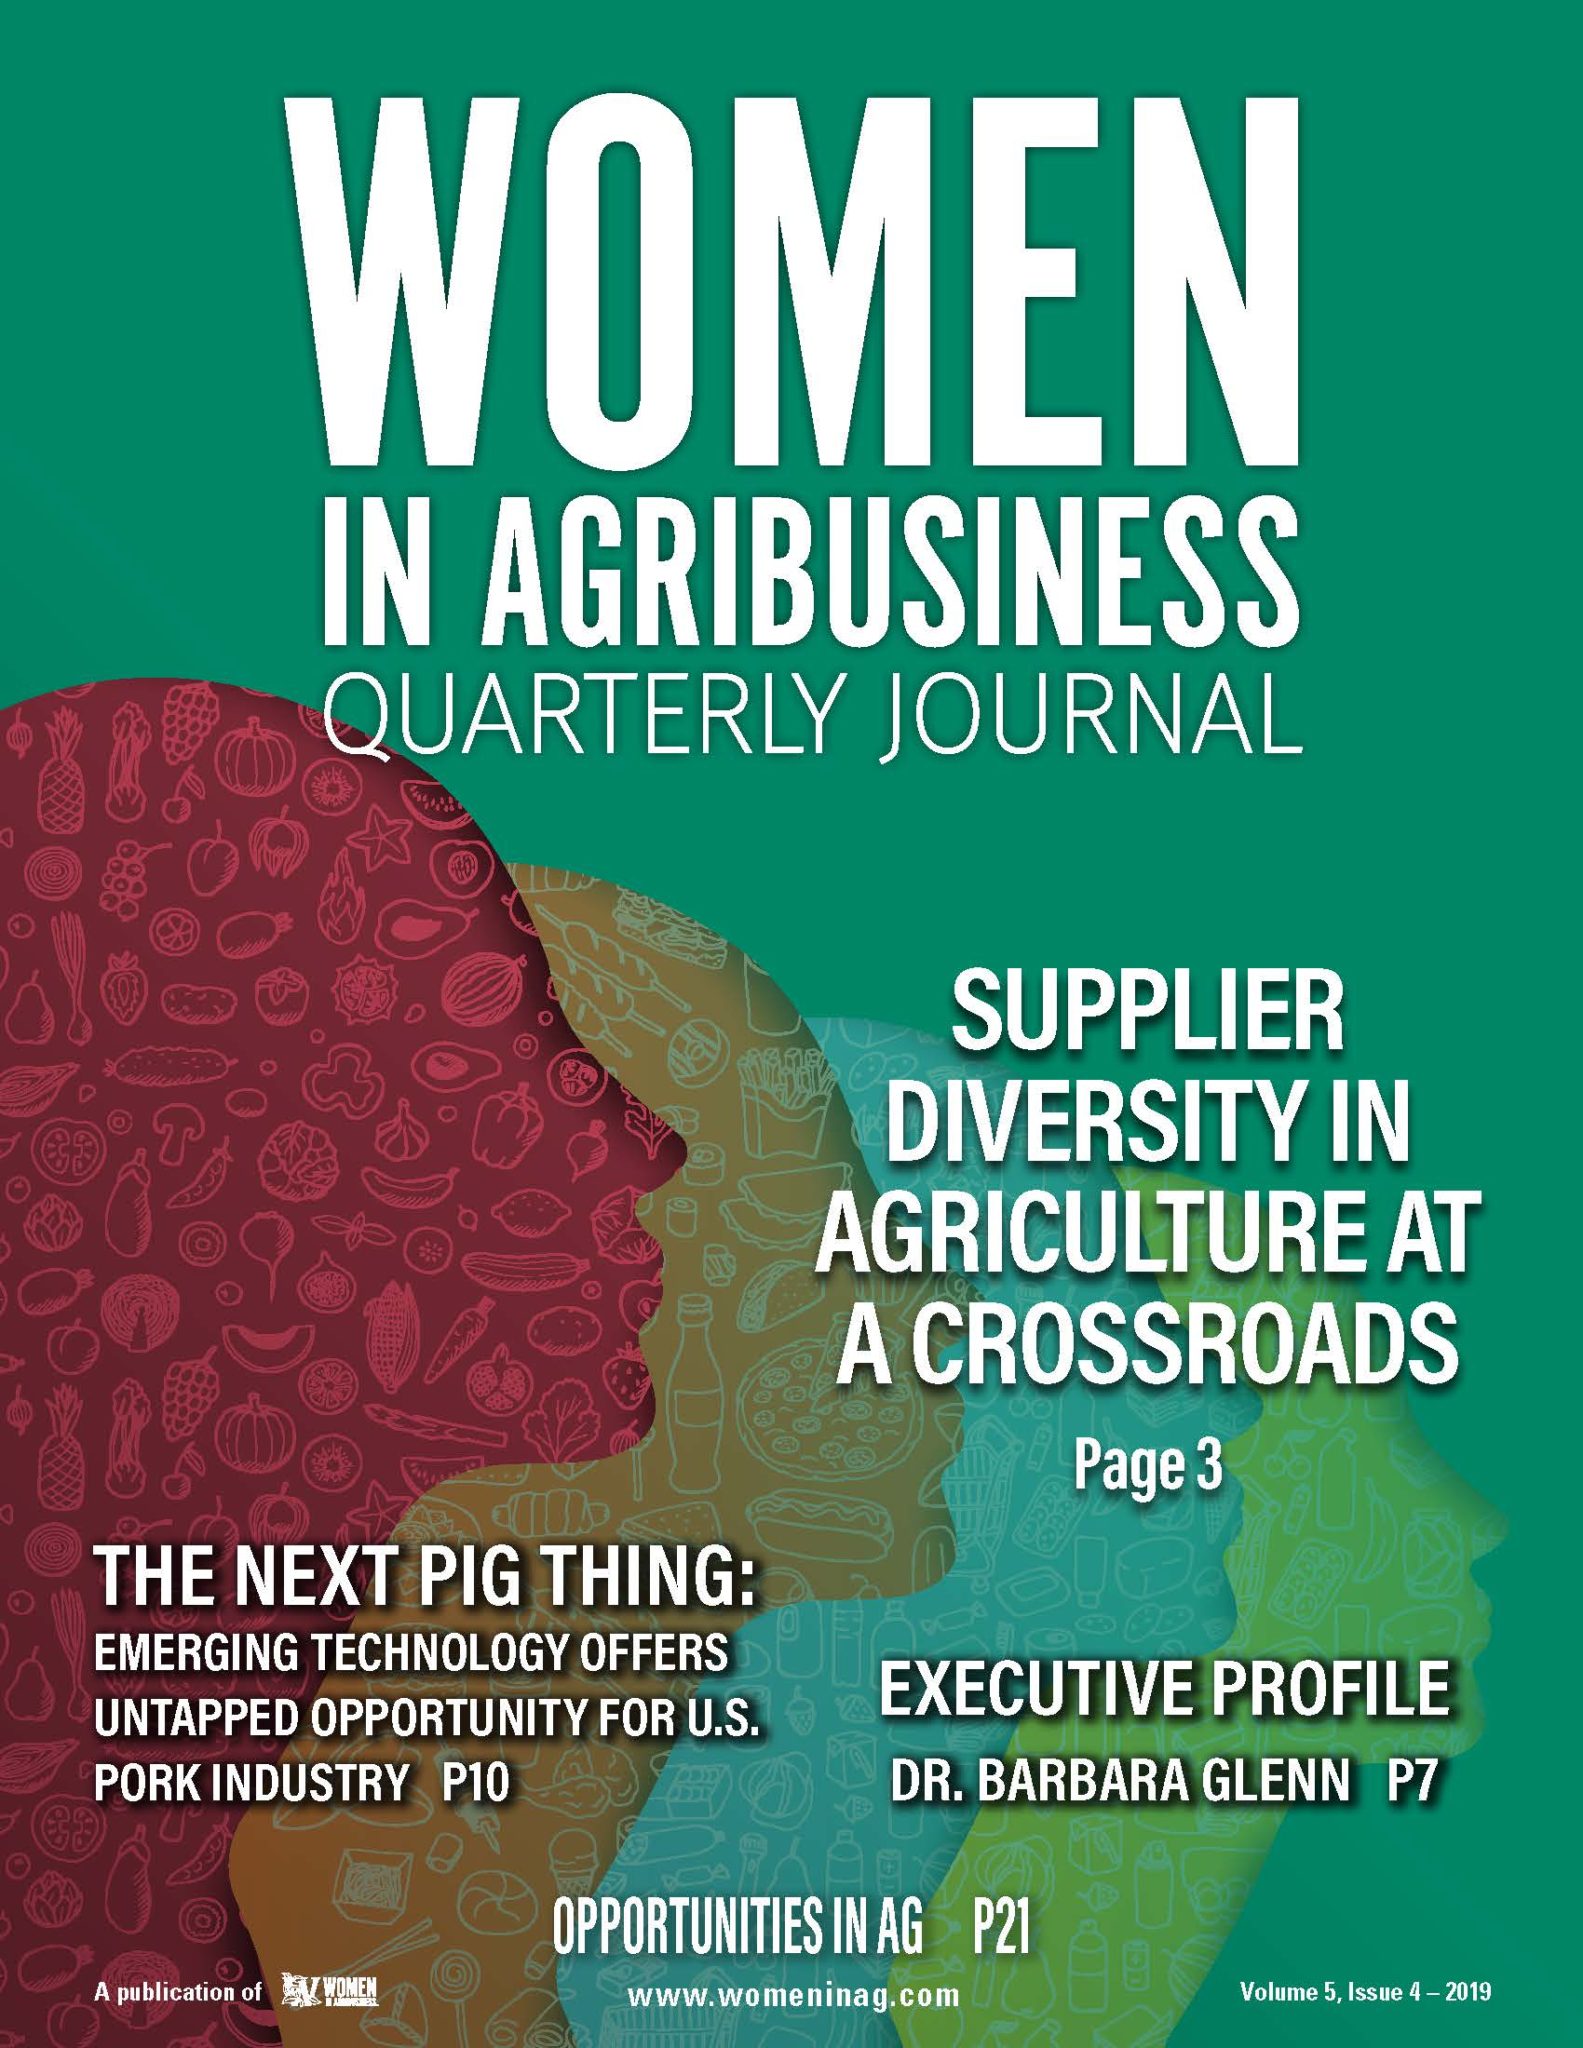 2019 WIA Quarterly Journal, Vol. 5 Issue 4, pp. 16-19